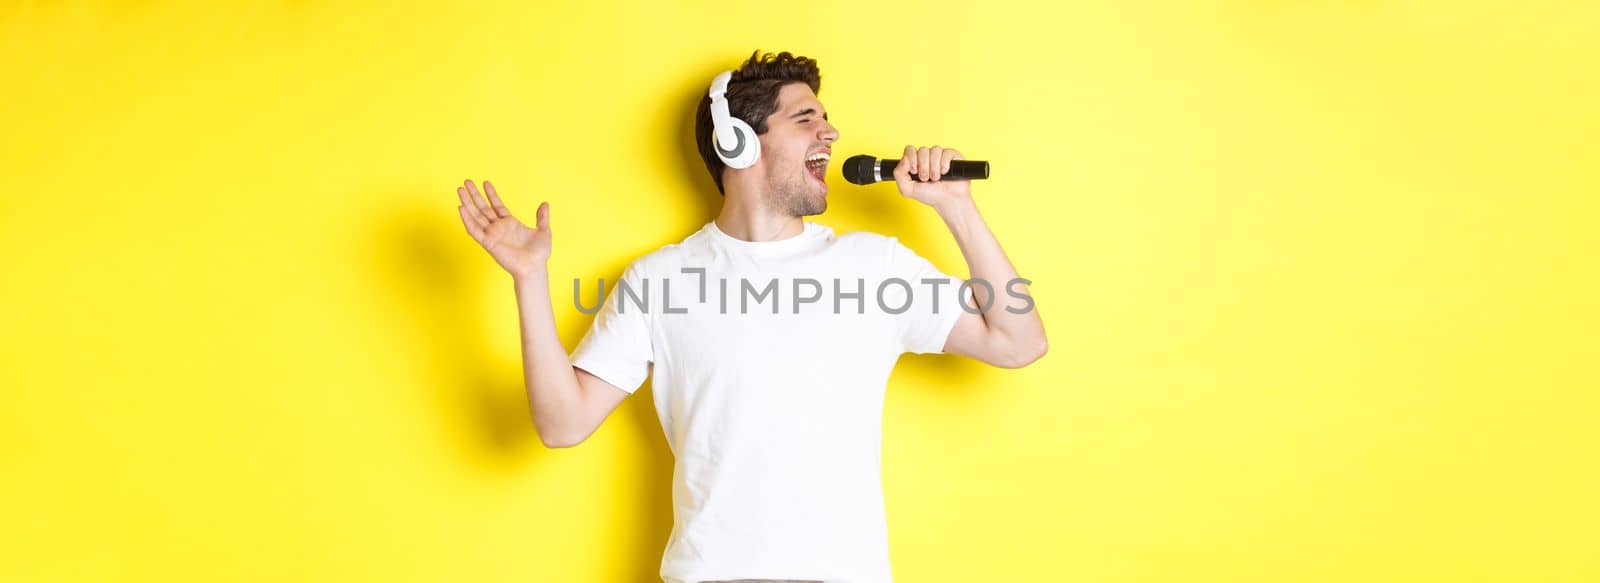 Passionate guy in headphones holding microphone, singing karaoke song, standing over yellow background in white clothes.